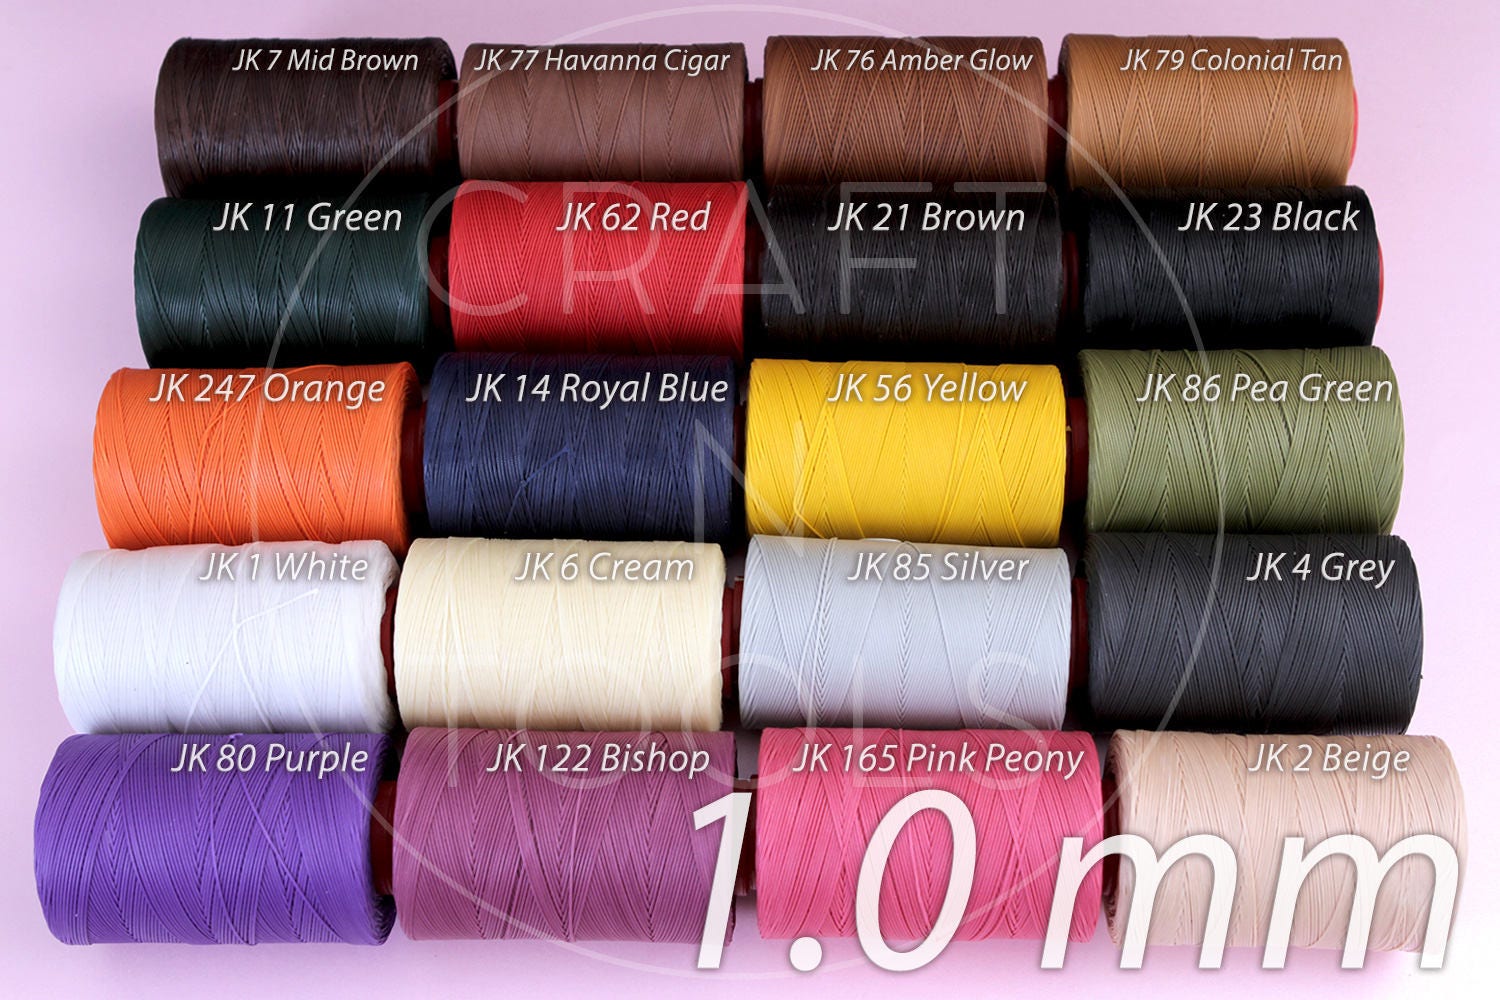 1.7mm Tiger Thread, the BEST for Hand Sewing Leather Also Known as Ritza 25  